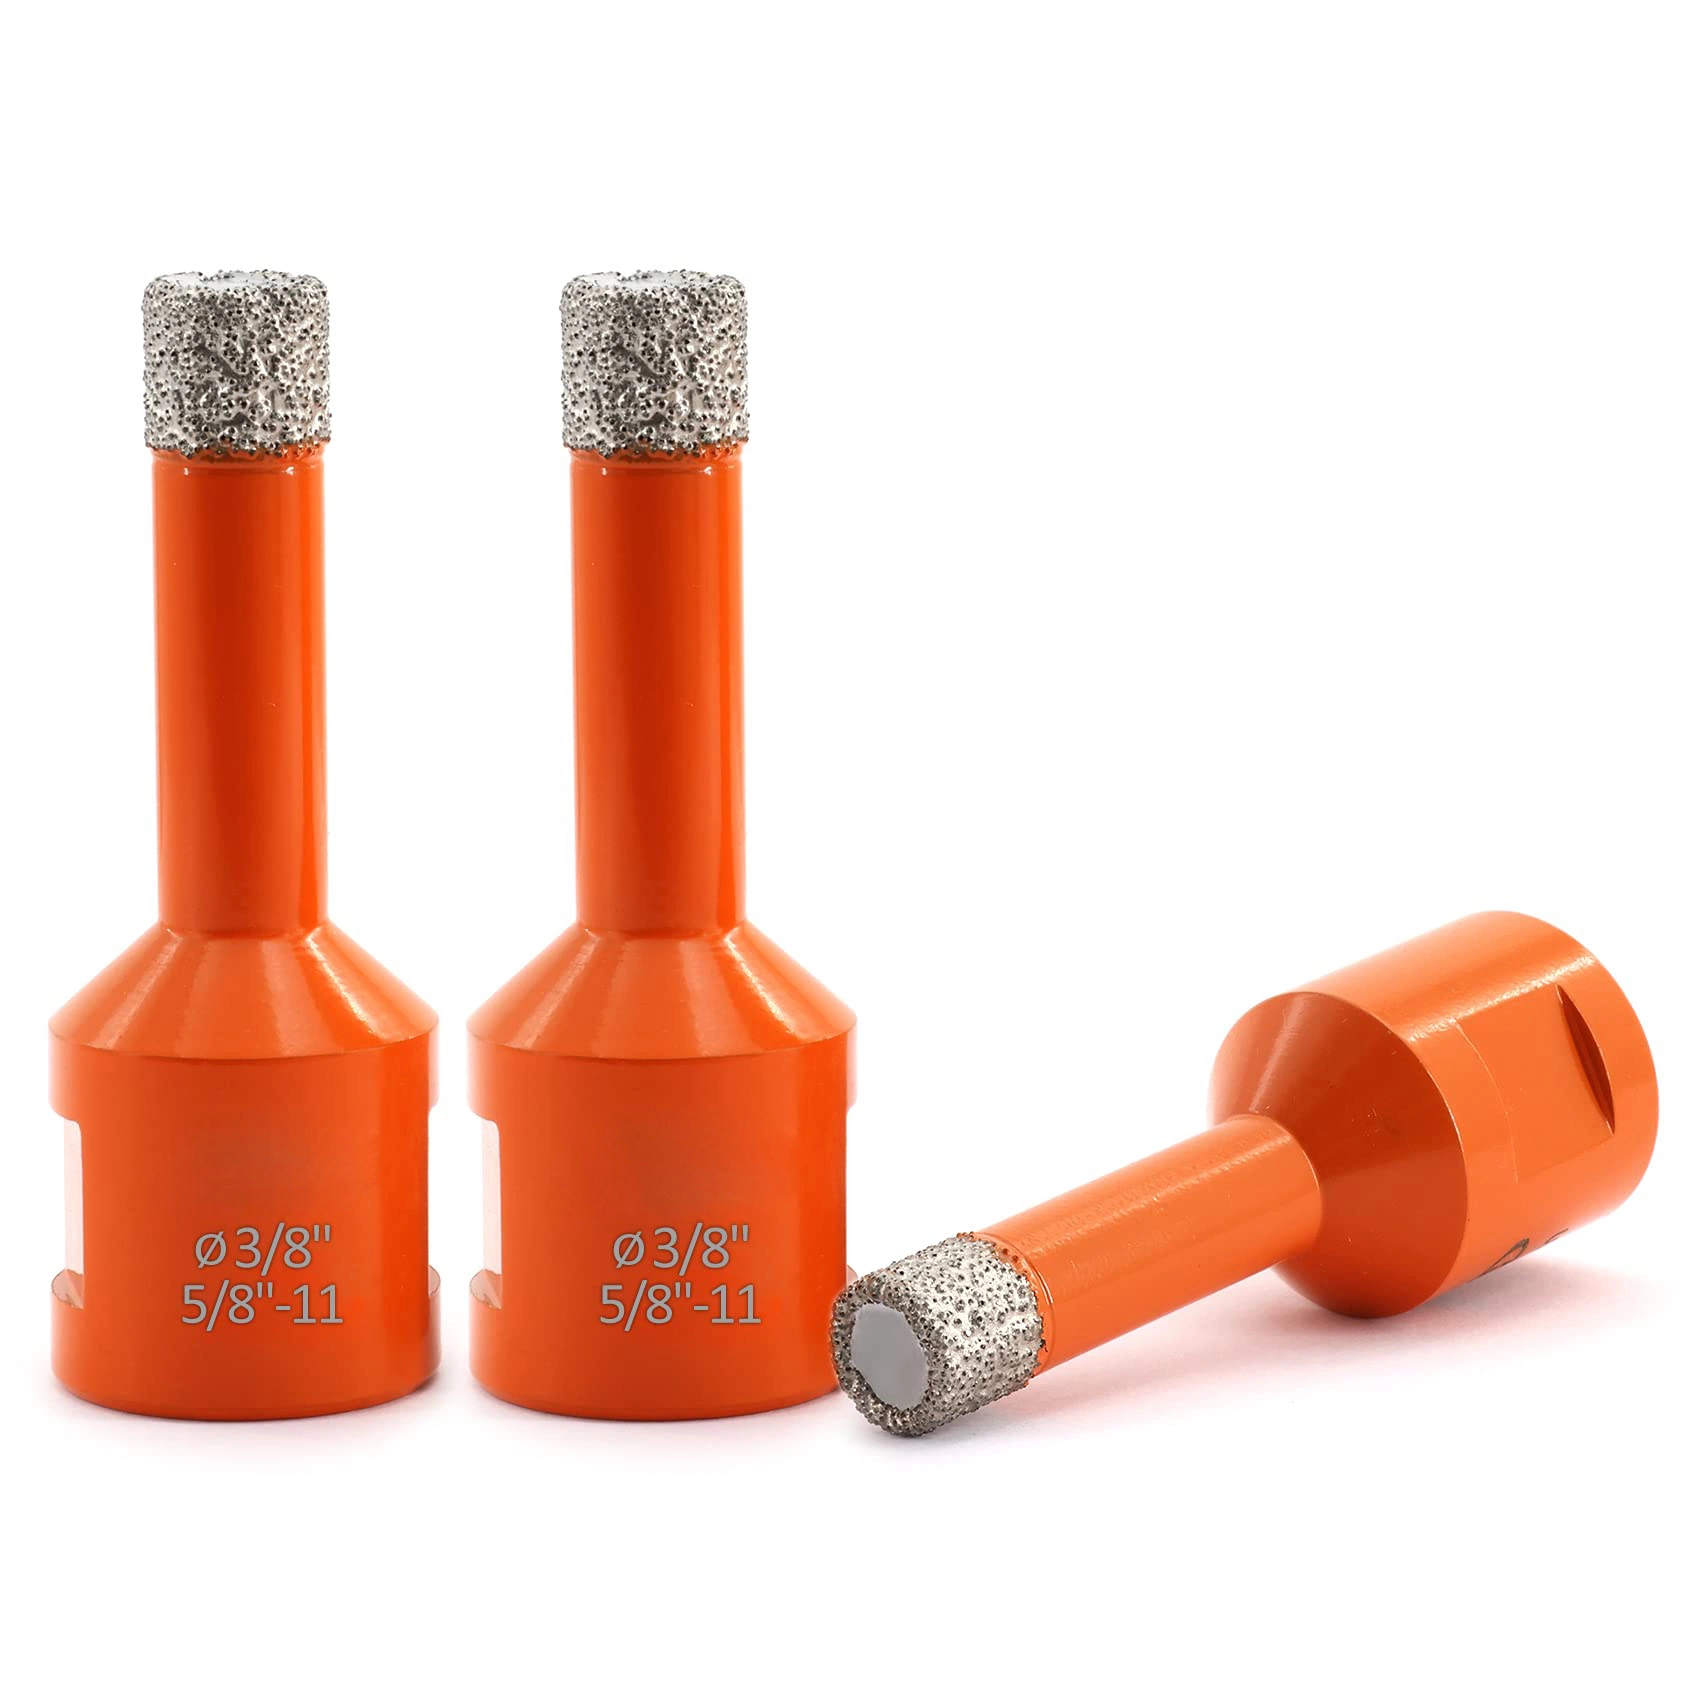 Diamond Core Drill Bits Hole Saw Set with 5/8-11 Thread for Porcelain Tile, Ceramic Granite Marble Stone Masonry Brick (25mm Finger Bit+SDS Shank Adapter)